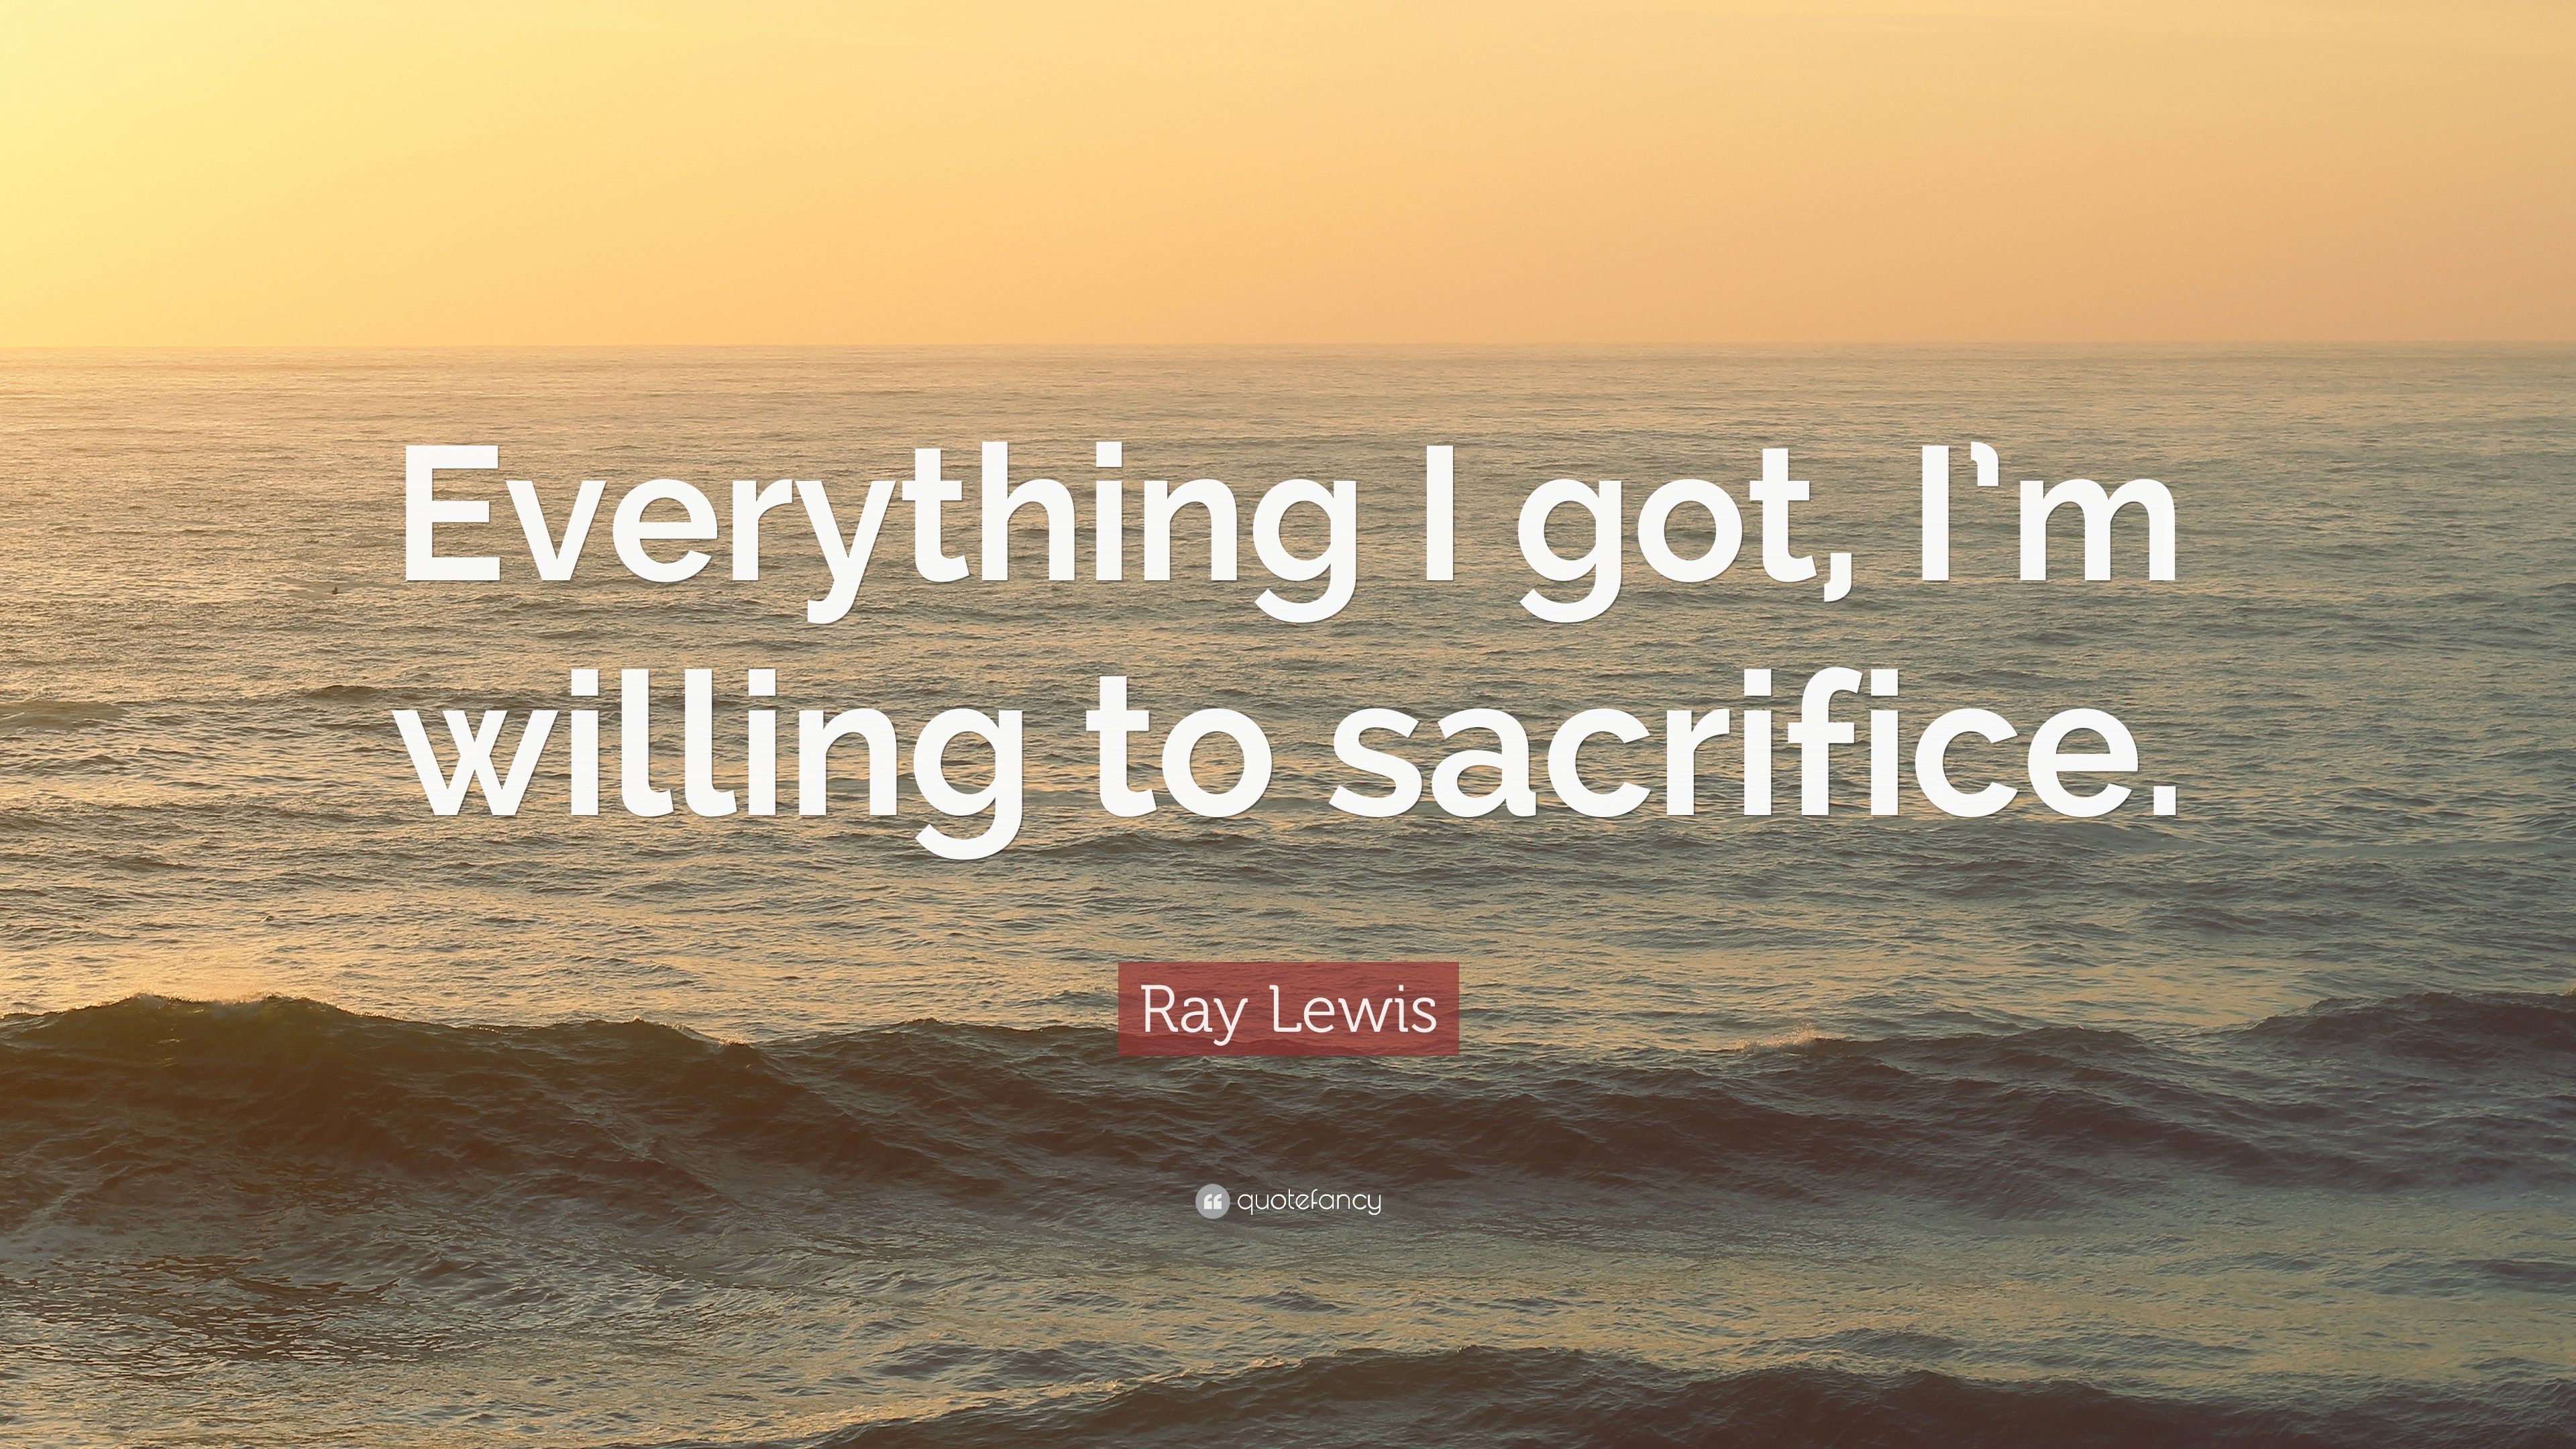 Ray Lewis Quote: “Everything I got, I'm willing to sacrifice.” 10